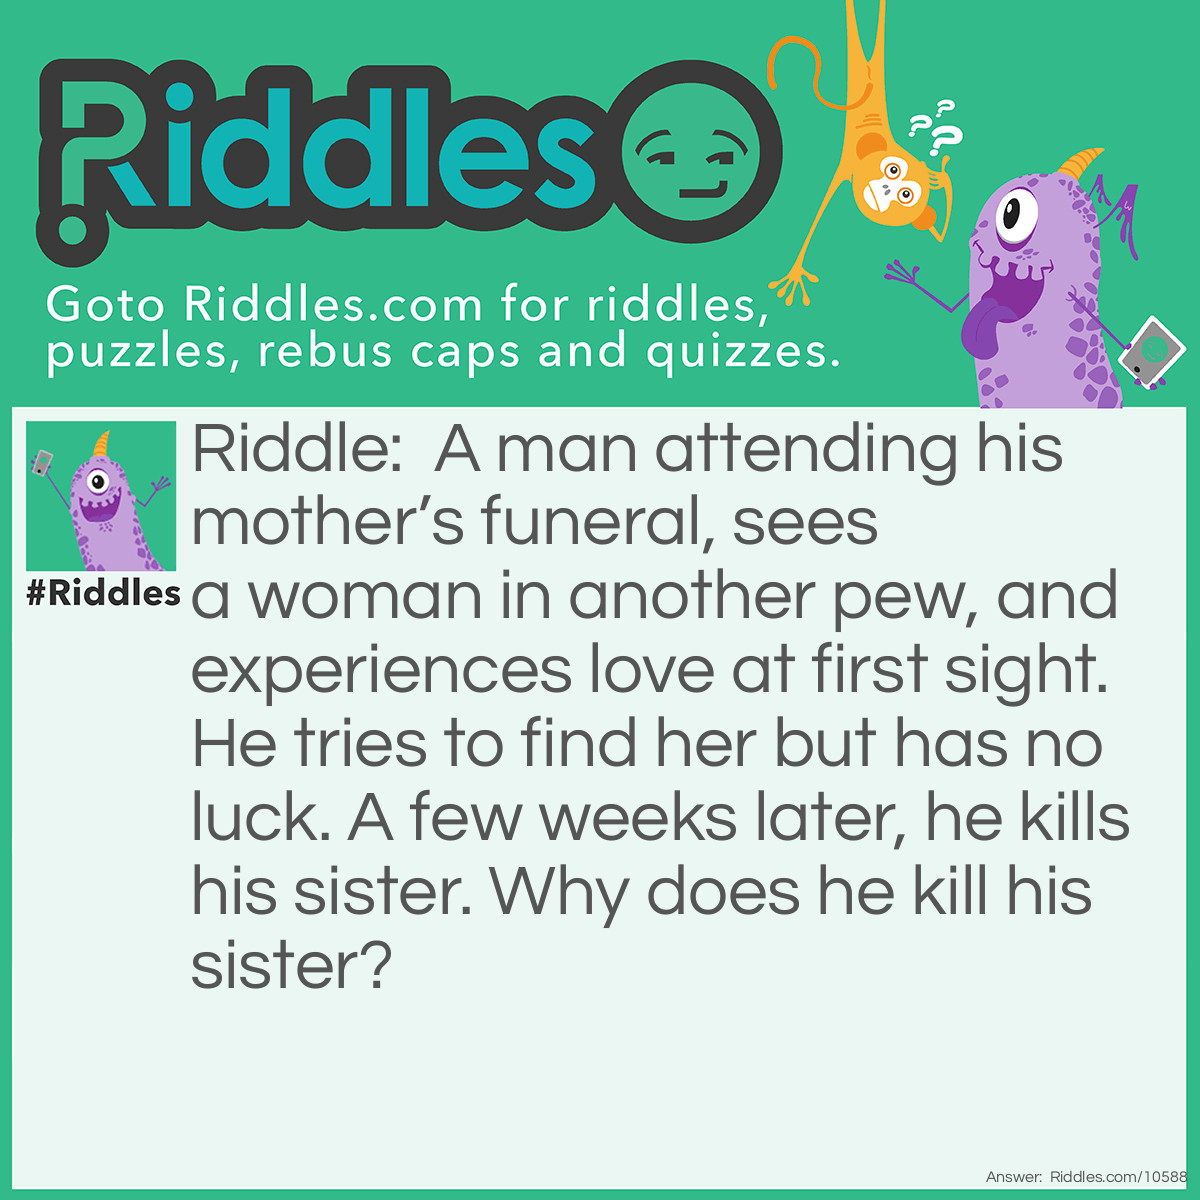 Riddle: A man attending his mother’s funeral, sees a woman in another pew, and experiences love at first sight. He tries to find her but has no luck. A few weeks later, he kills his sister. Why does he kill his sister? Answer: He kills his sister in hopes of seeing the woman at her funeral.